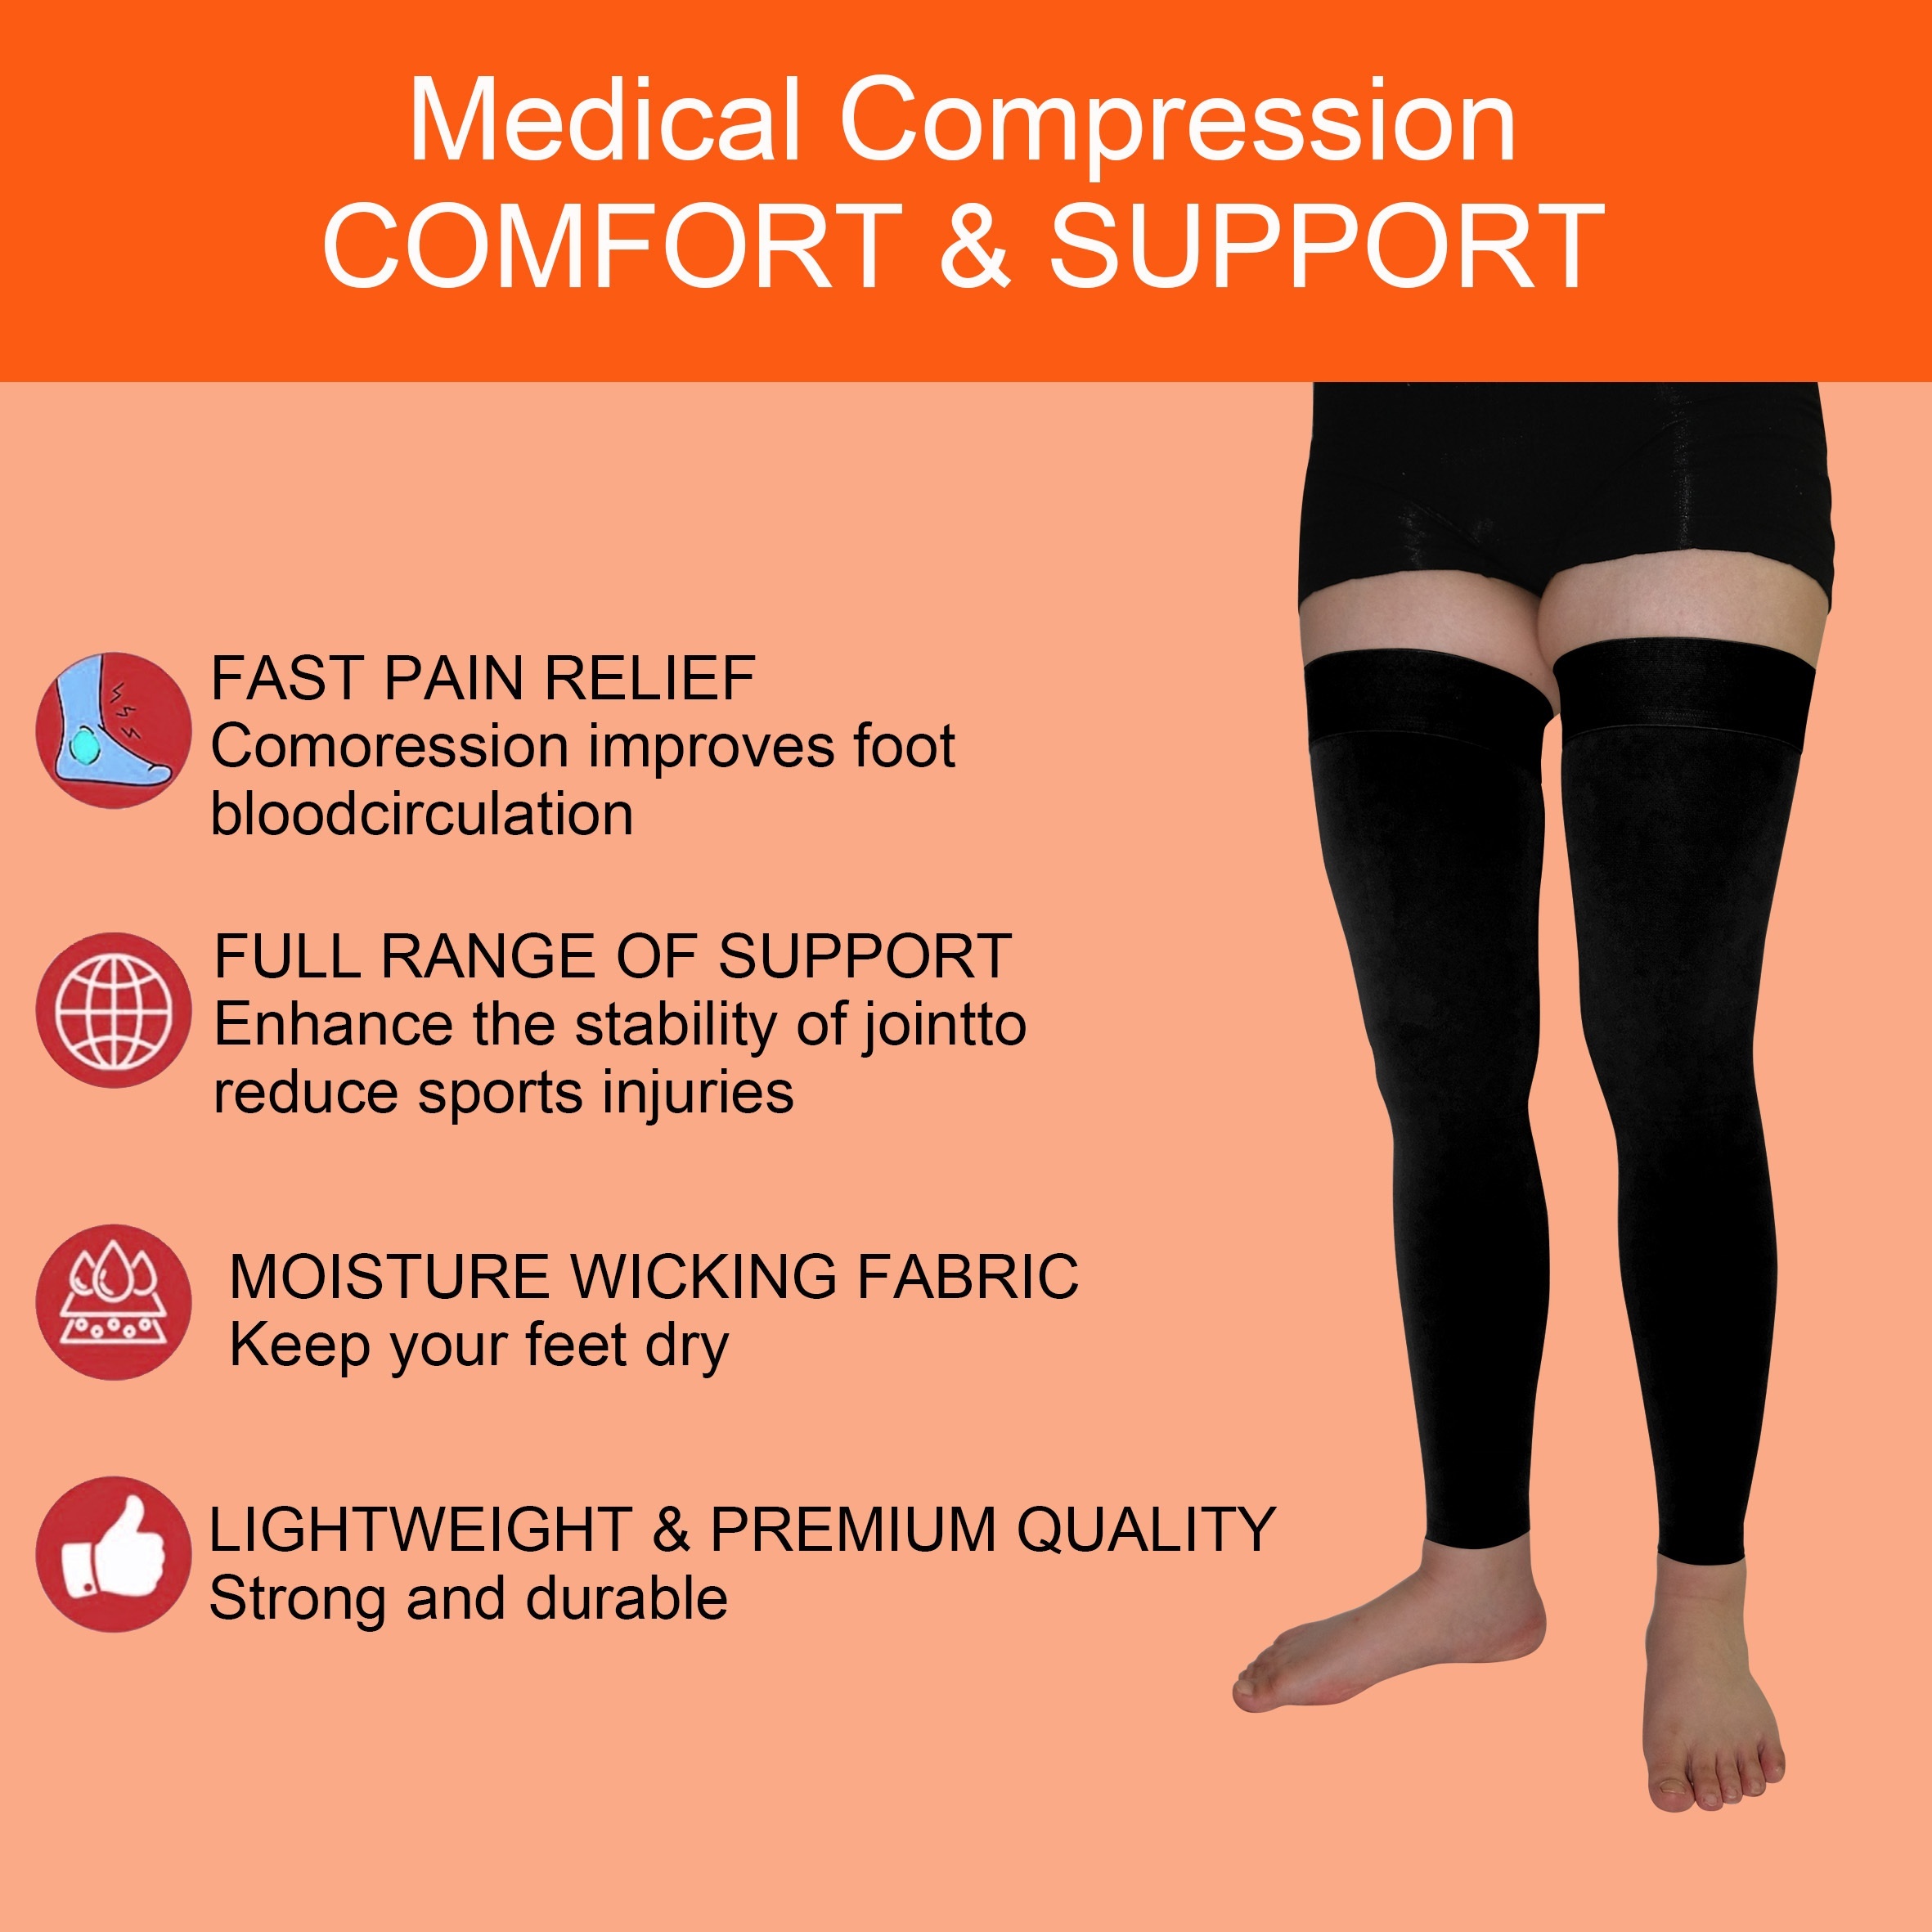 1 Pair Preventing Varicose Veins Footless Compression Socks for